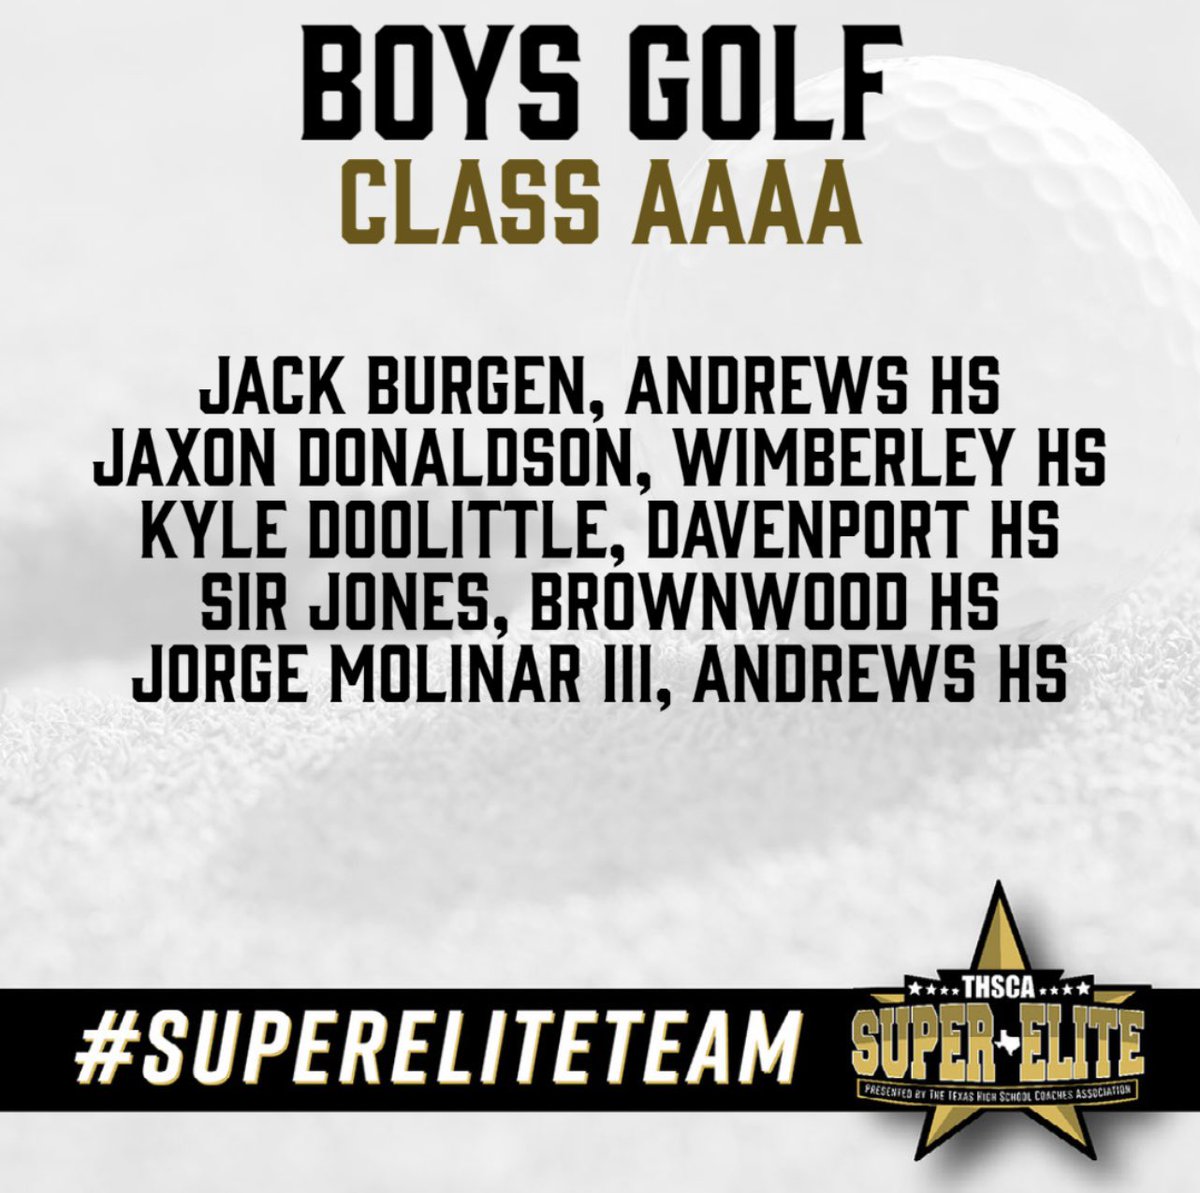 Congratulations to Andrews HS Golfers on a fantastic season and to these individuals for being recognized and selected to the THSCA Class 4A Super Elite Golf Team.